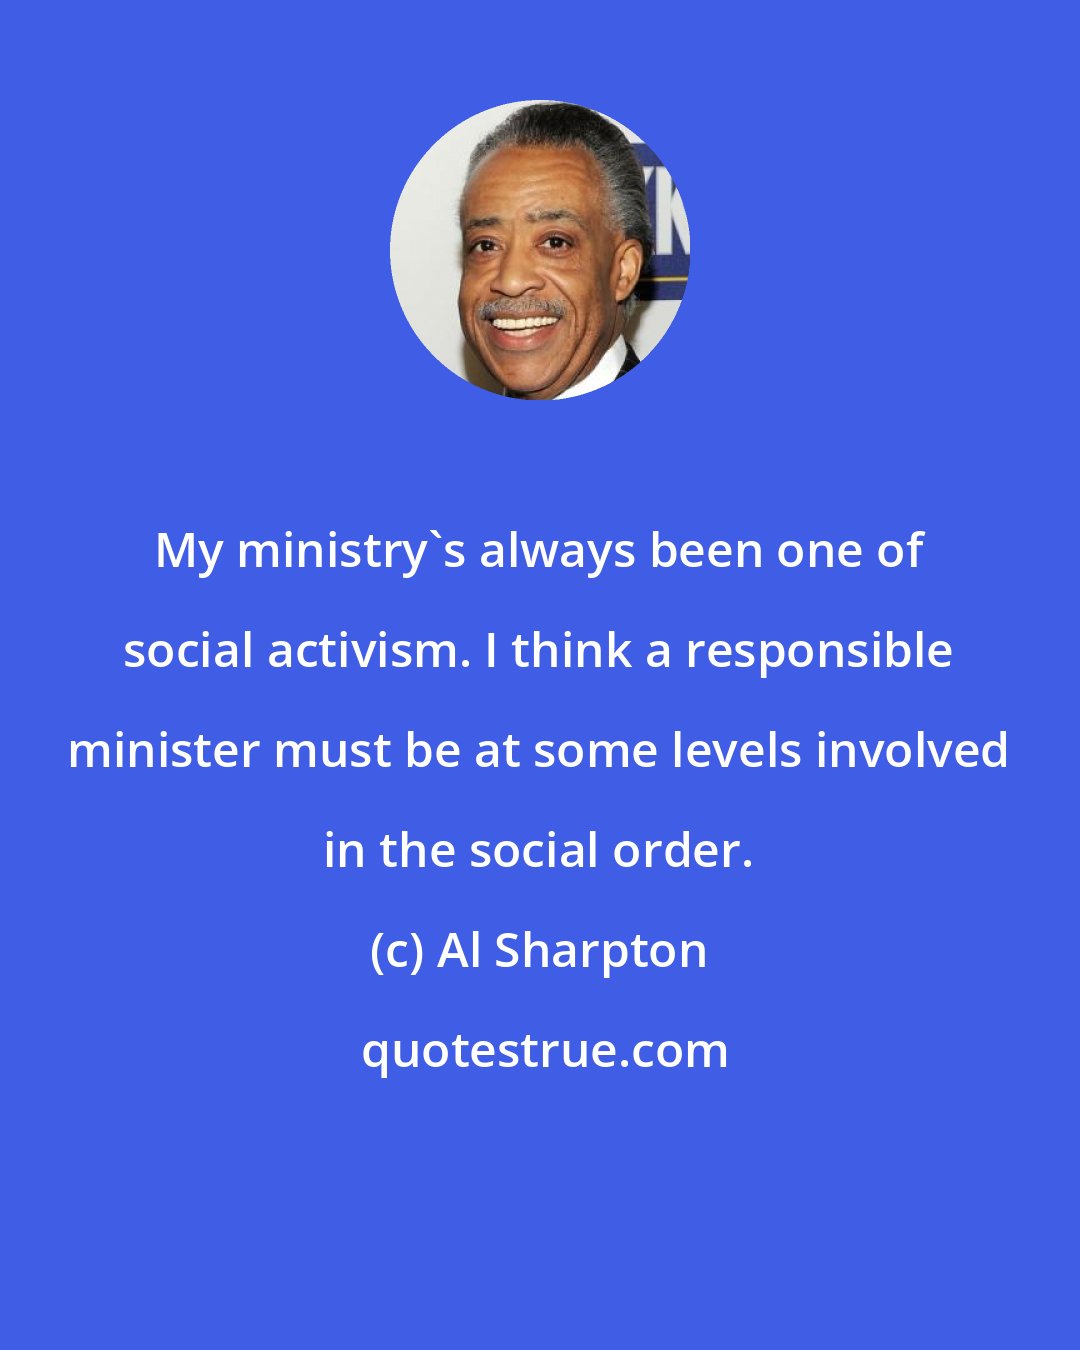 Al Sharpton: My ministry's always been one of social activism. I think a responsible minister must be at some levels involved in the social order.